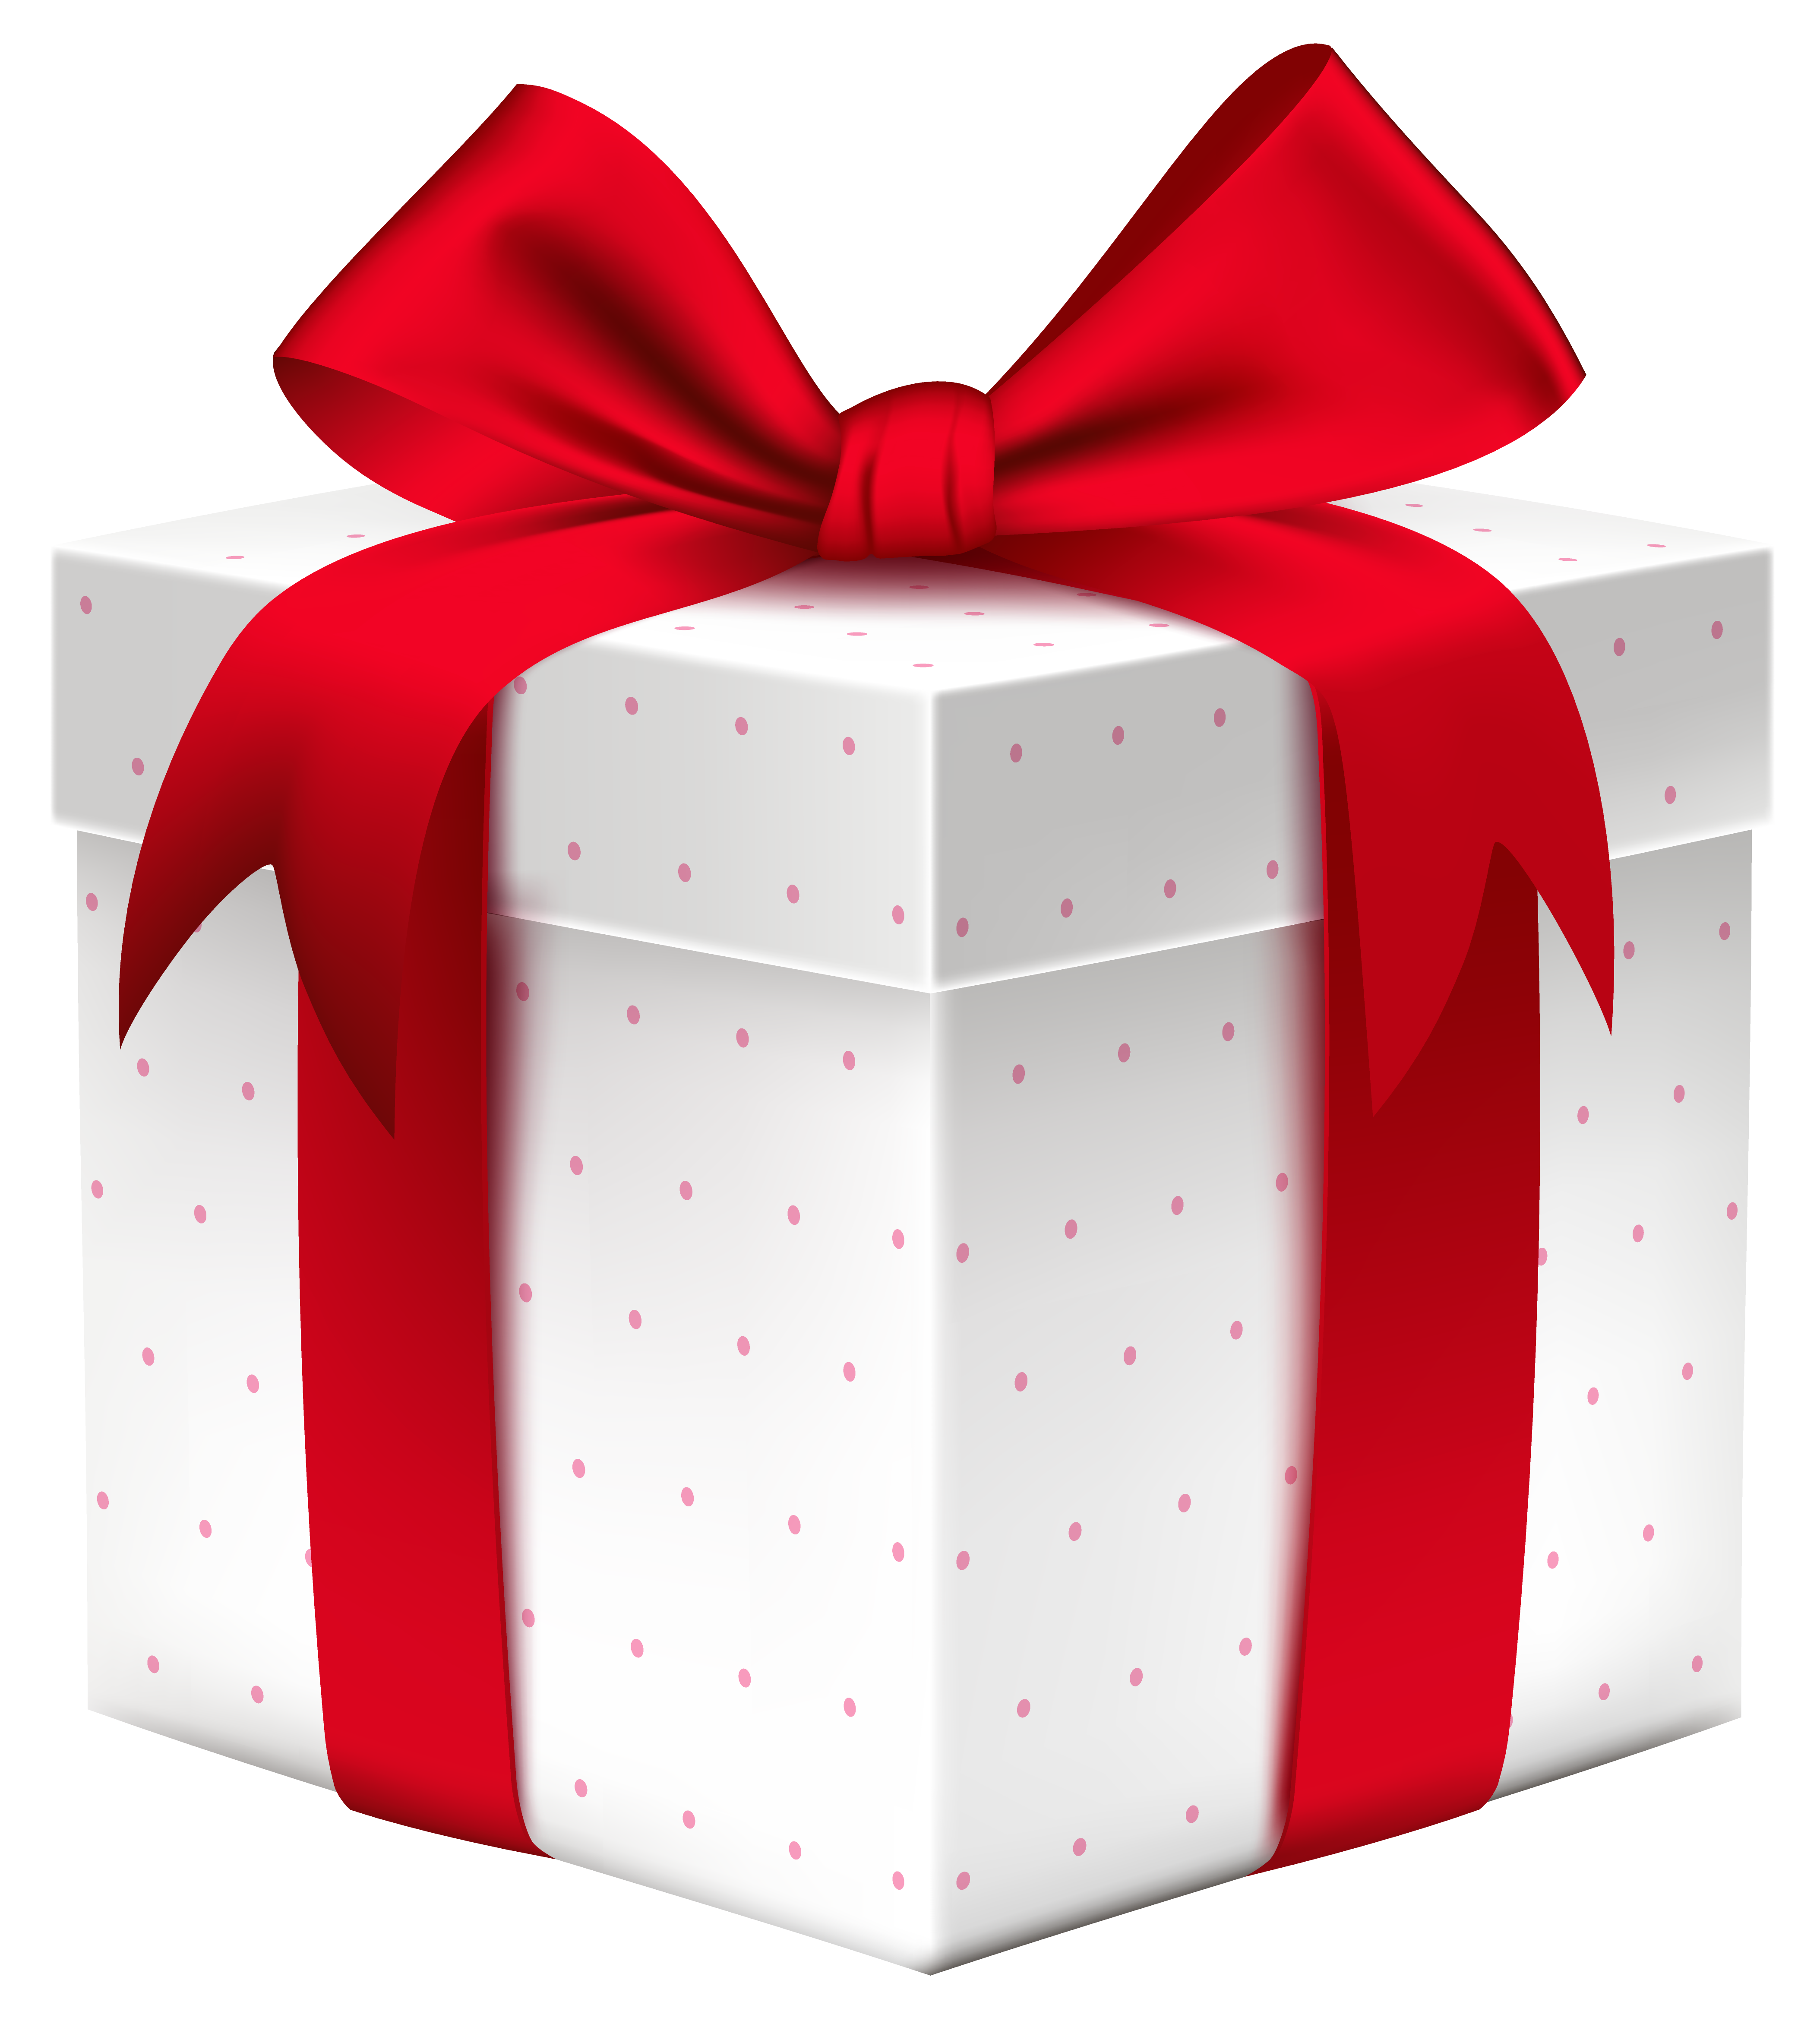 Free Gift PNG Transparent Images, Download Free Gift PNG Transparent